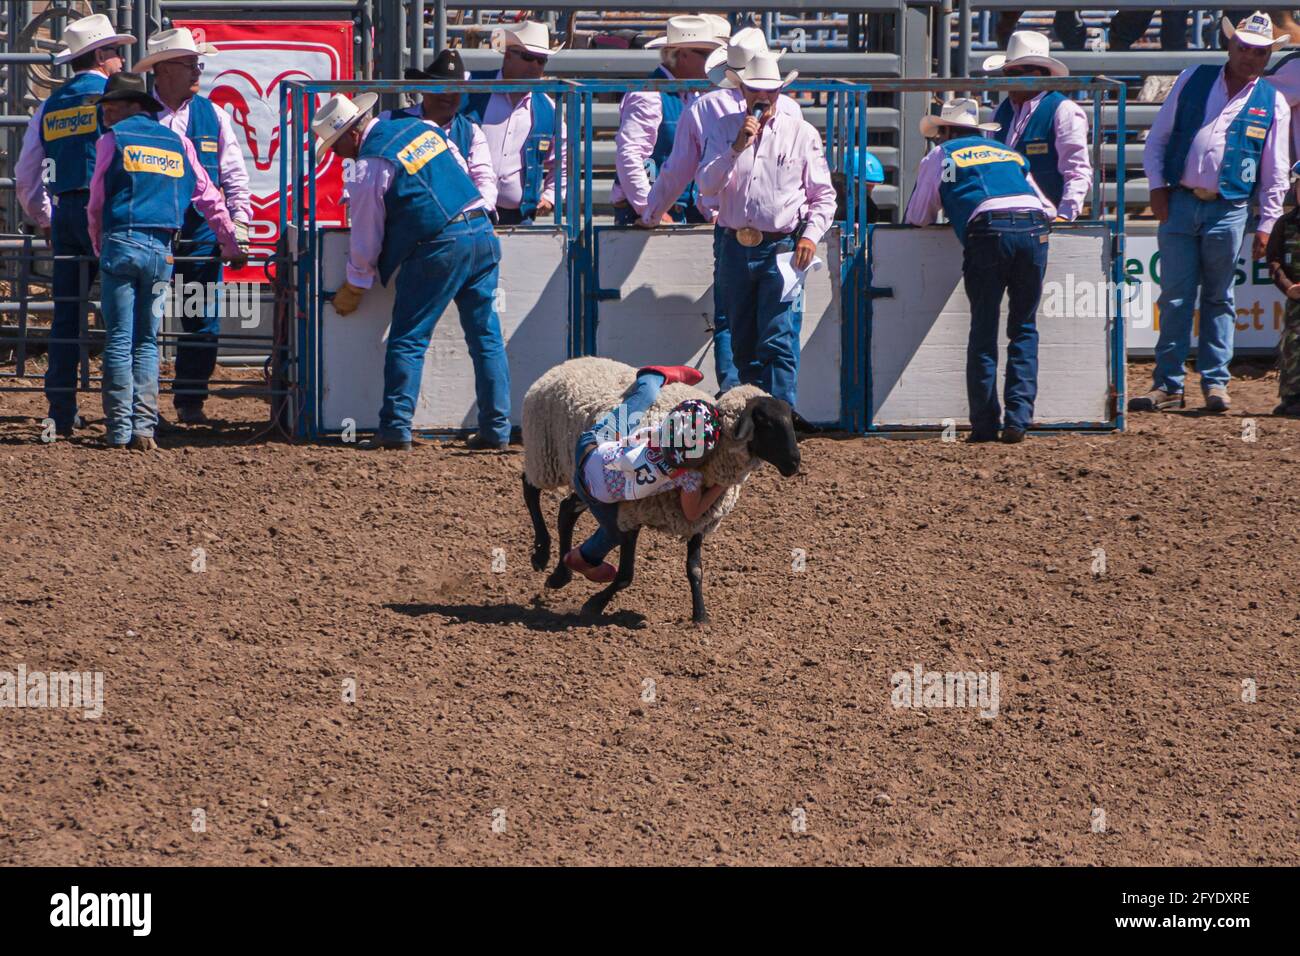 Santa Maria, CA, USA - June 6, 2010: Rodeo. Kid barely hangs on side of sheep keeping one leg on back of the animal. Handlers present. Stock Photo